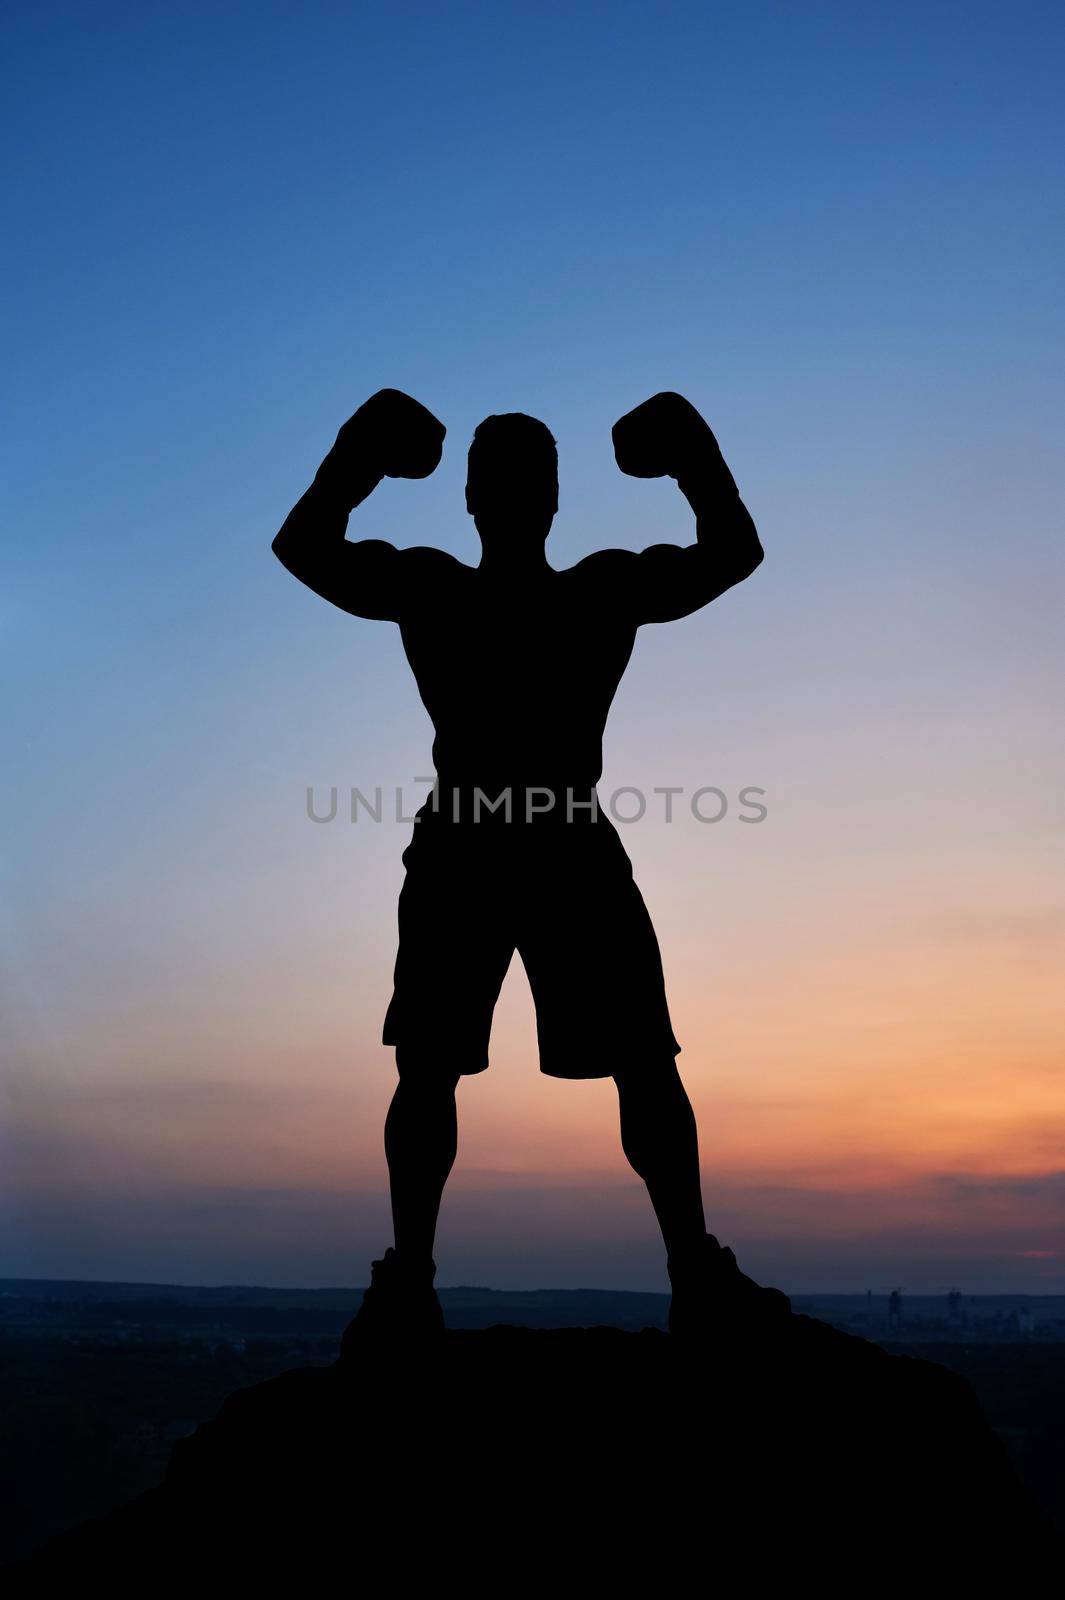 Silhouette of a muscular strong man flexing his muscles standing outdoors stunning sunset scenery on the background guy mysterious incognito sportsperson sportsman boxer fighter bodybuilder